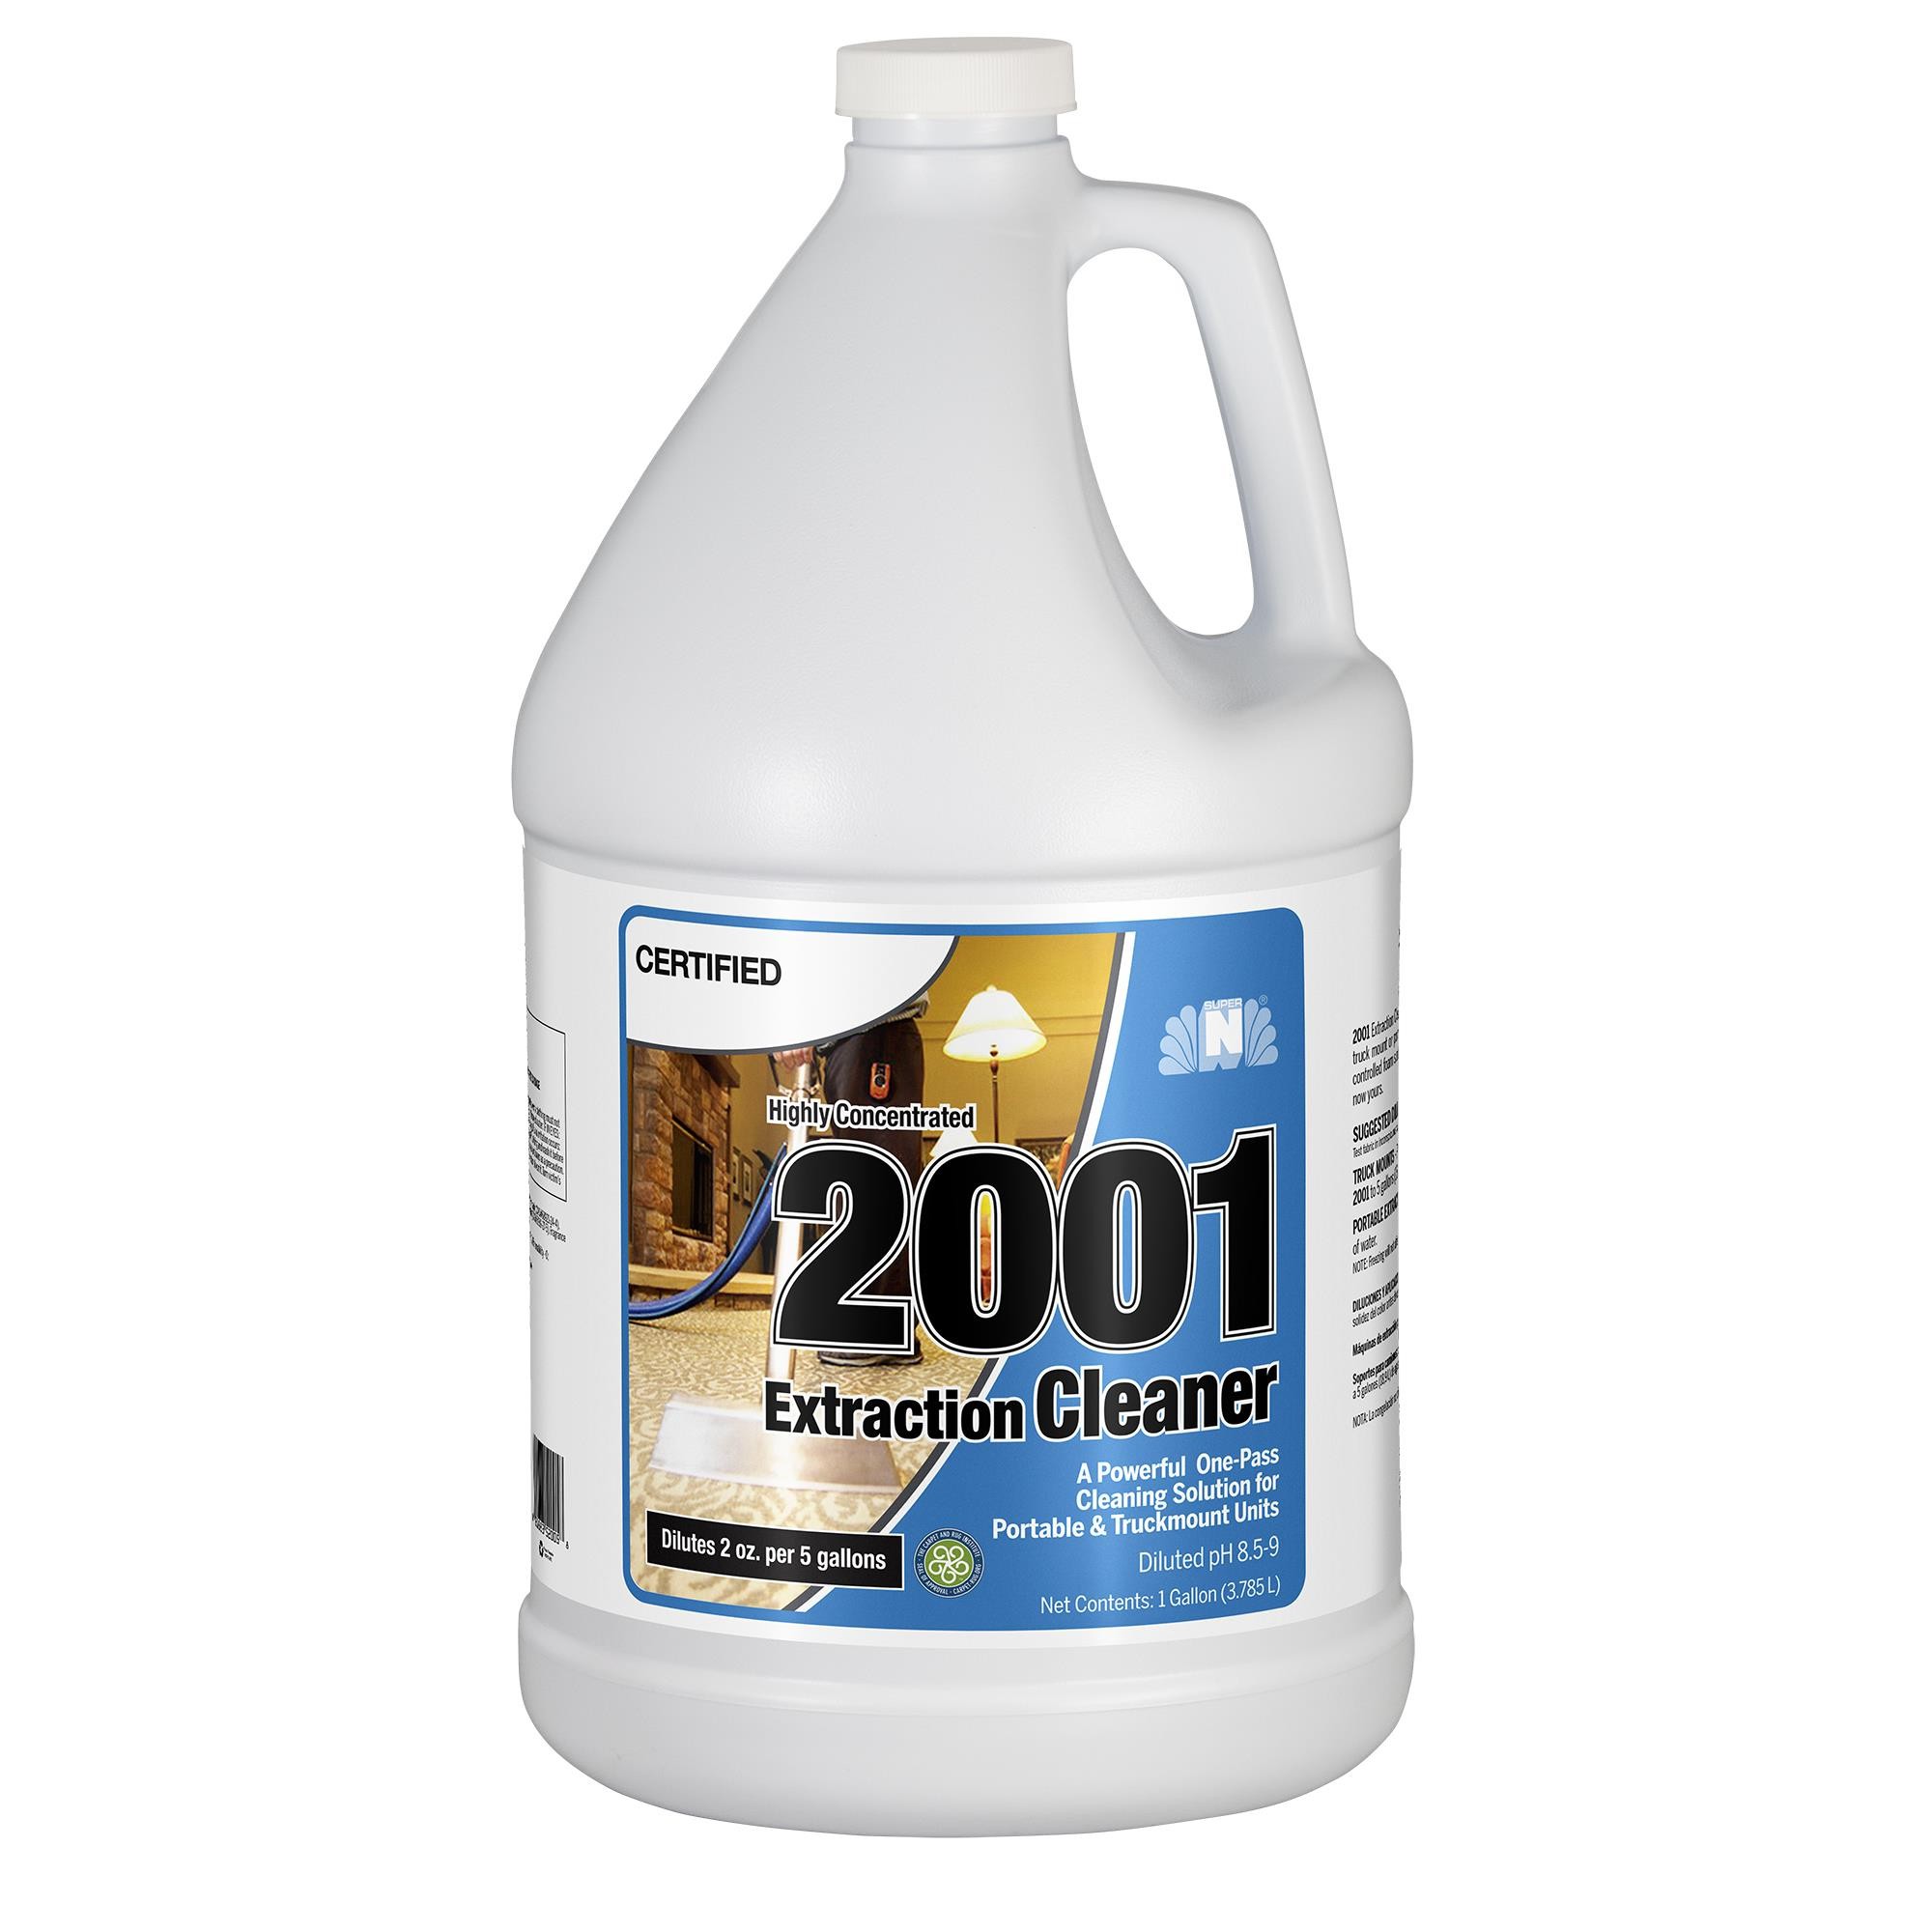 NILodor+Certified+2001+Highly+Concentrated+Extraction+Cleaner+-+1+Gallon.++C003-005+%5BCI-2001%5D